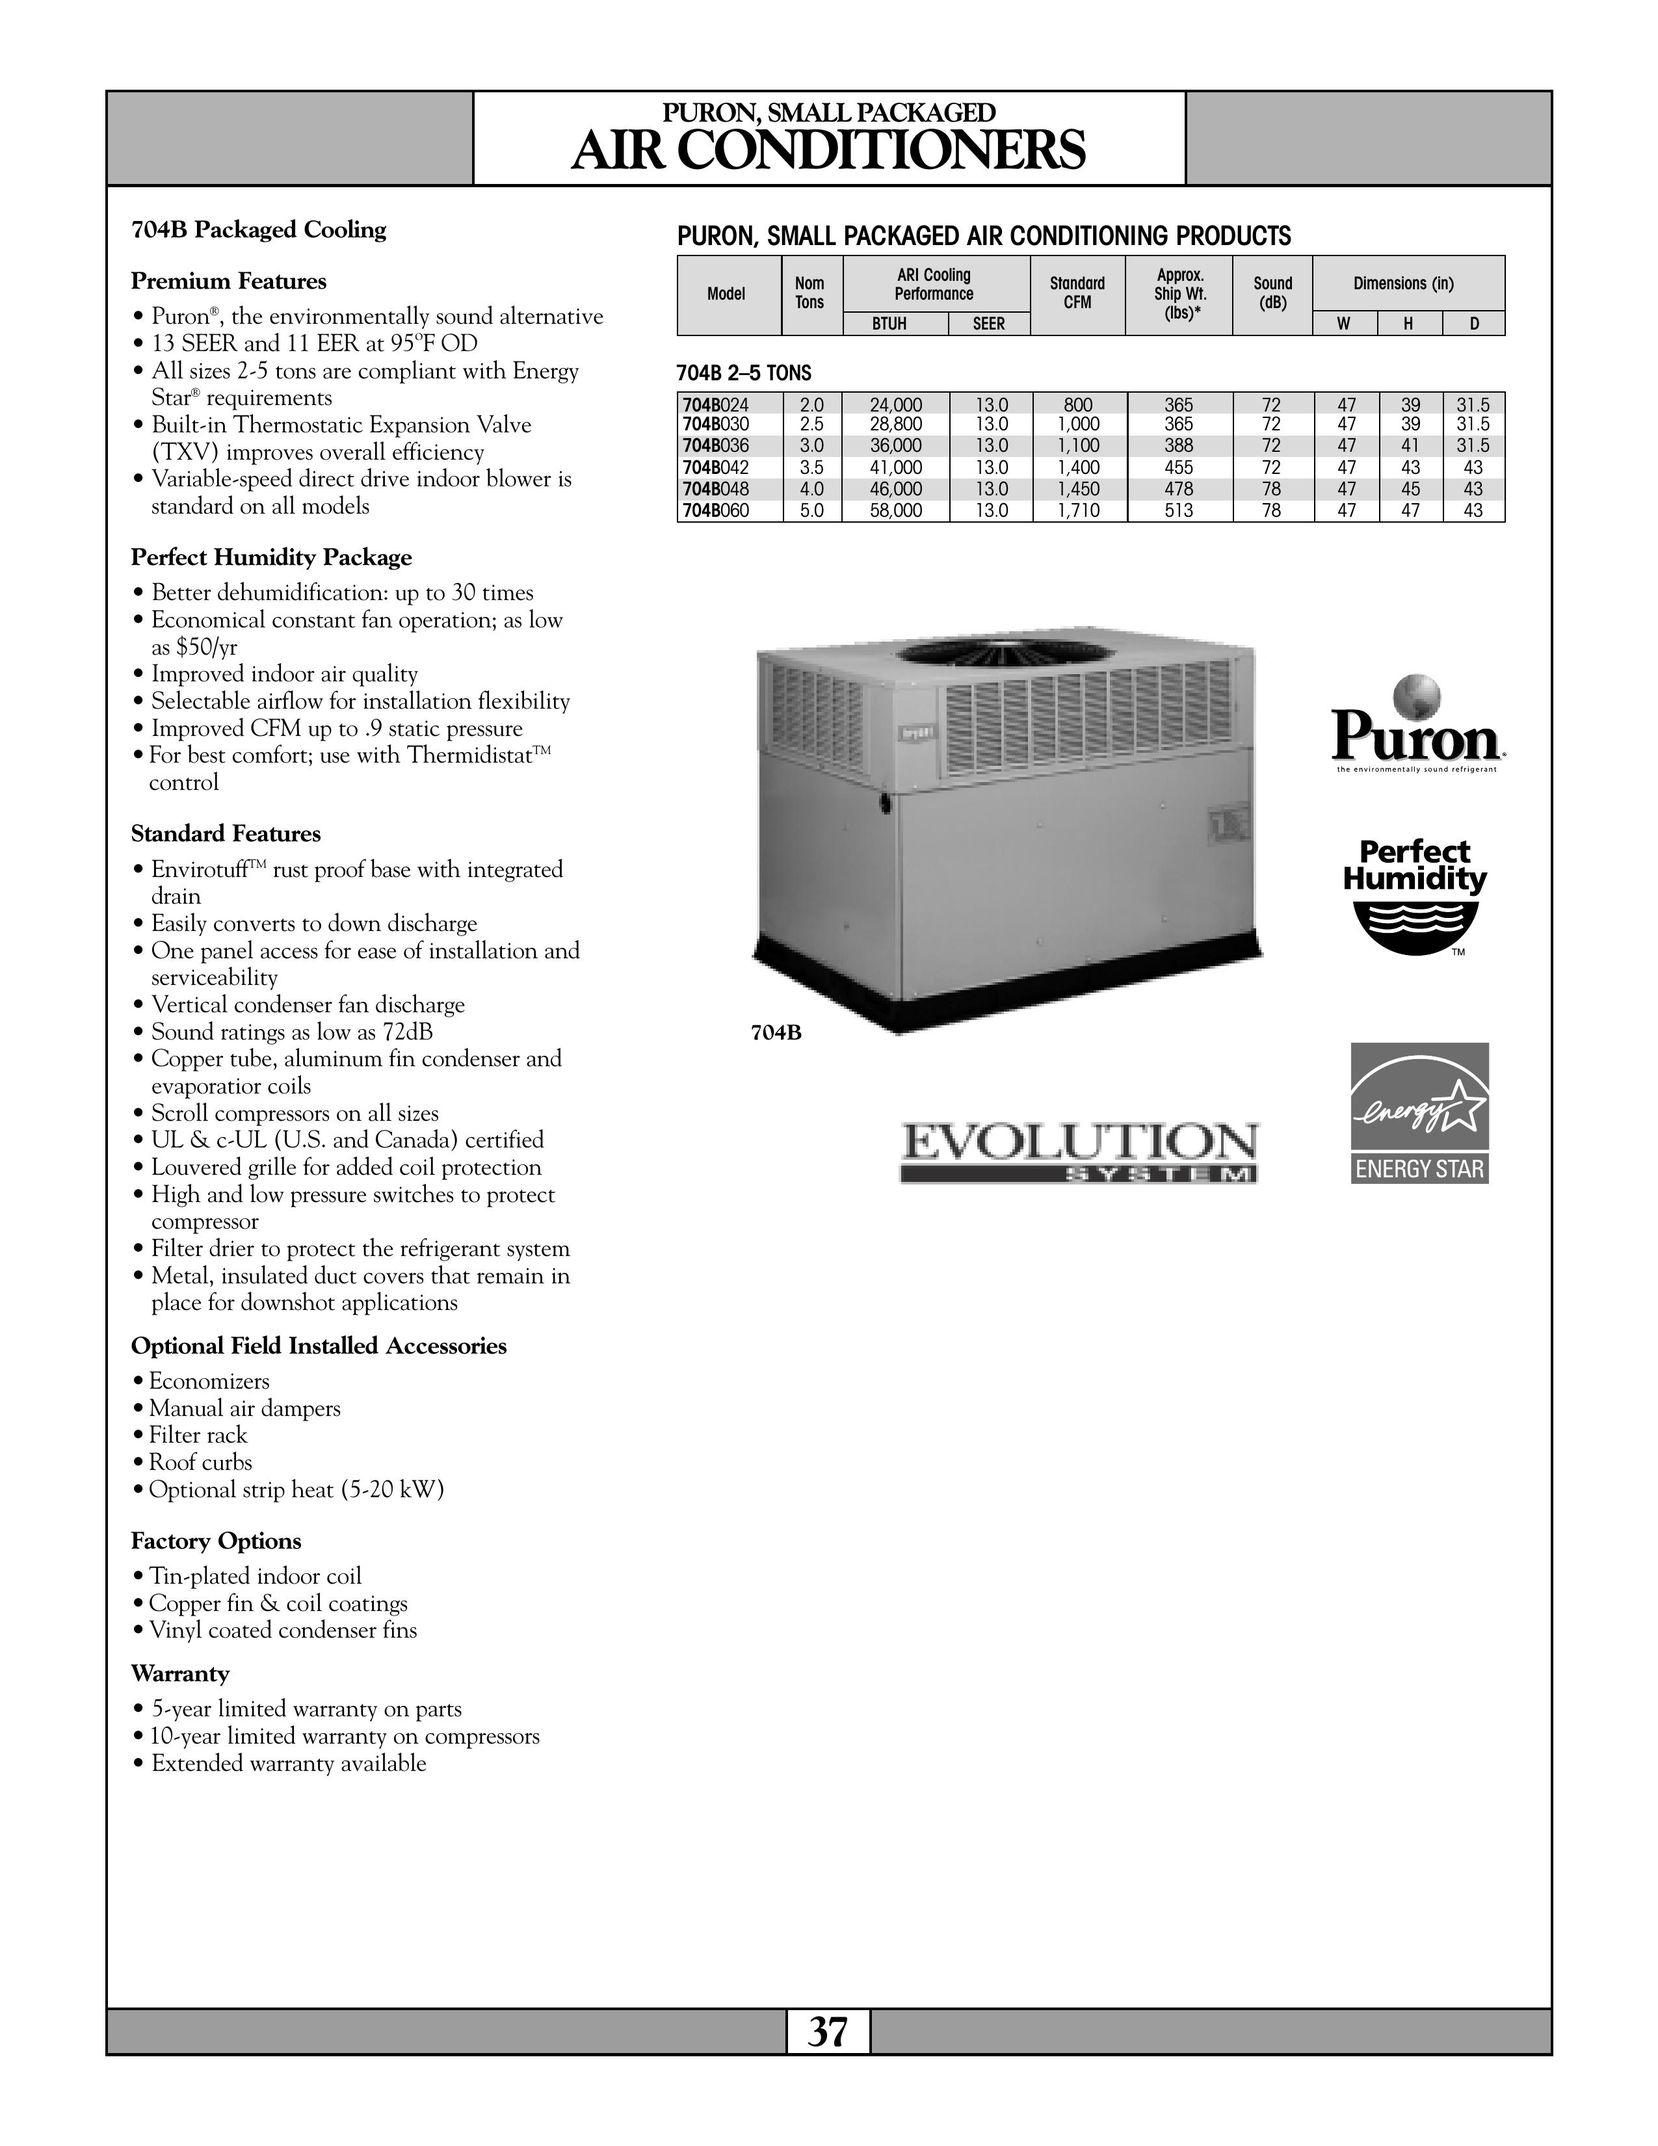 Revolutionary Cooling Systems 704B030 Air Conditioner User Manual